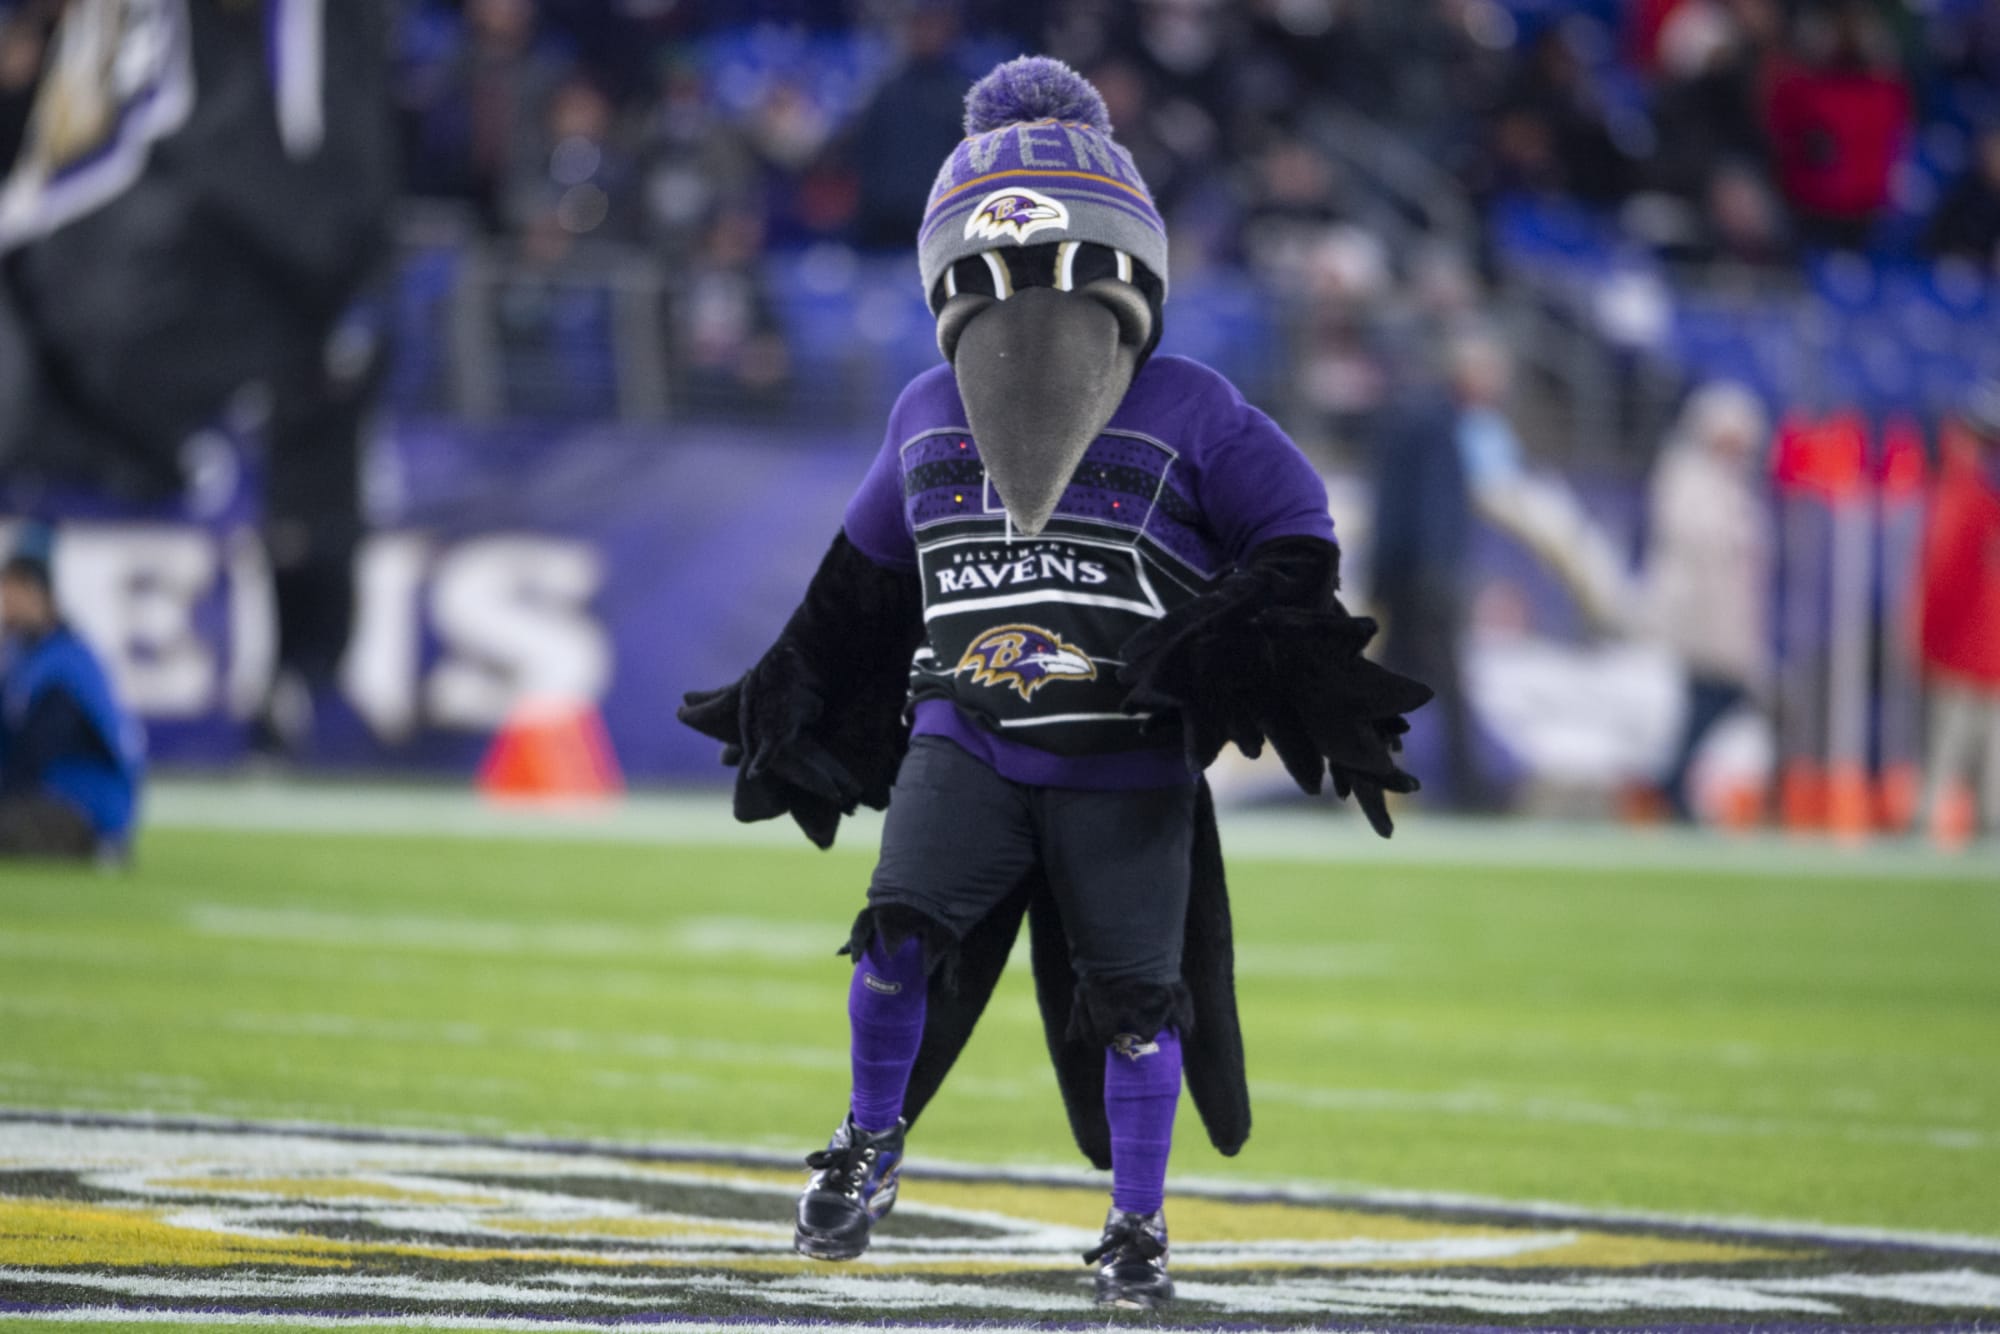 Ravens mascot “Poe” sidelined for the season with knee injury